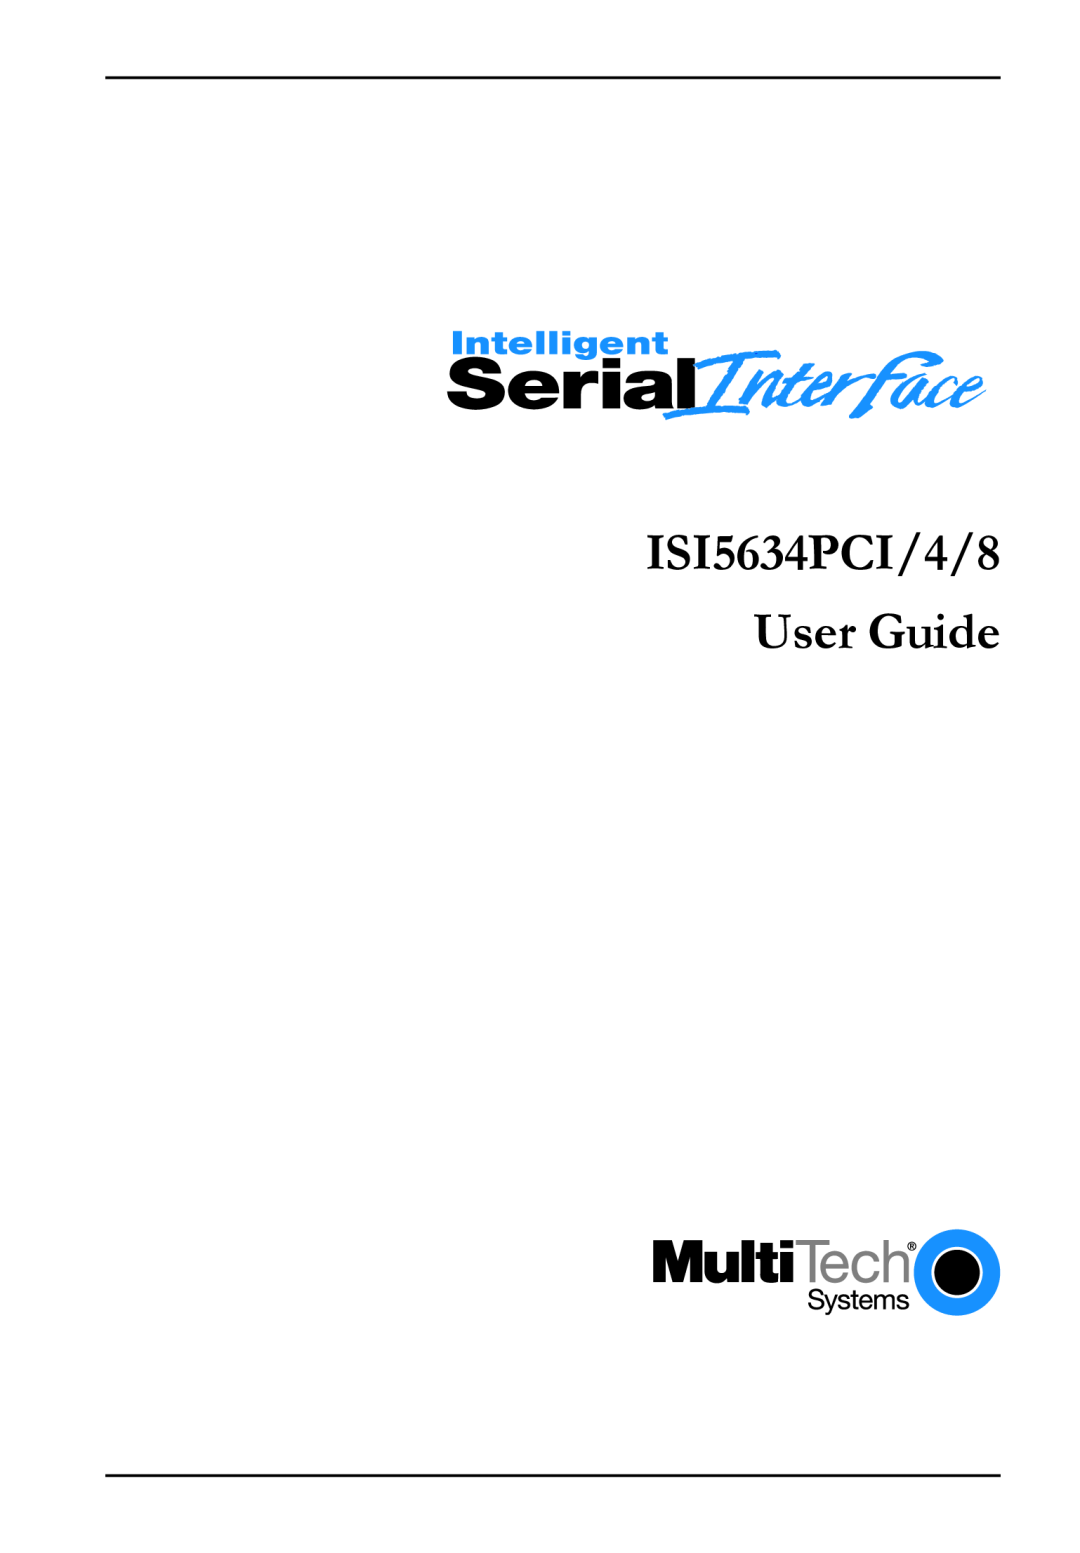 Multi-Tech Systems manual ISI5634PCI/4/8 User Guide 